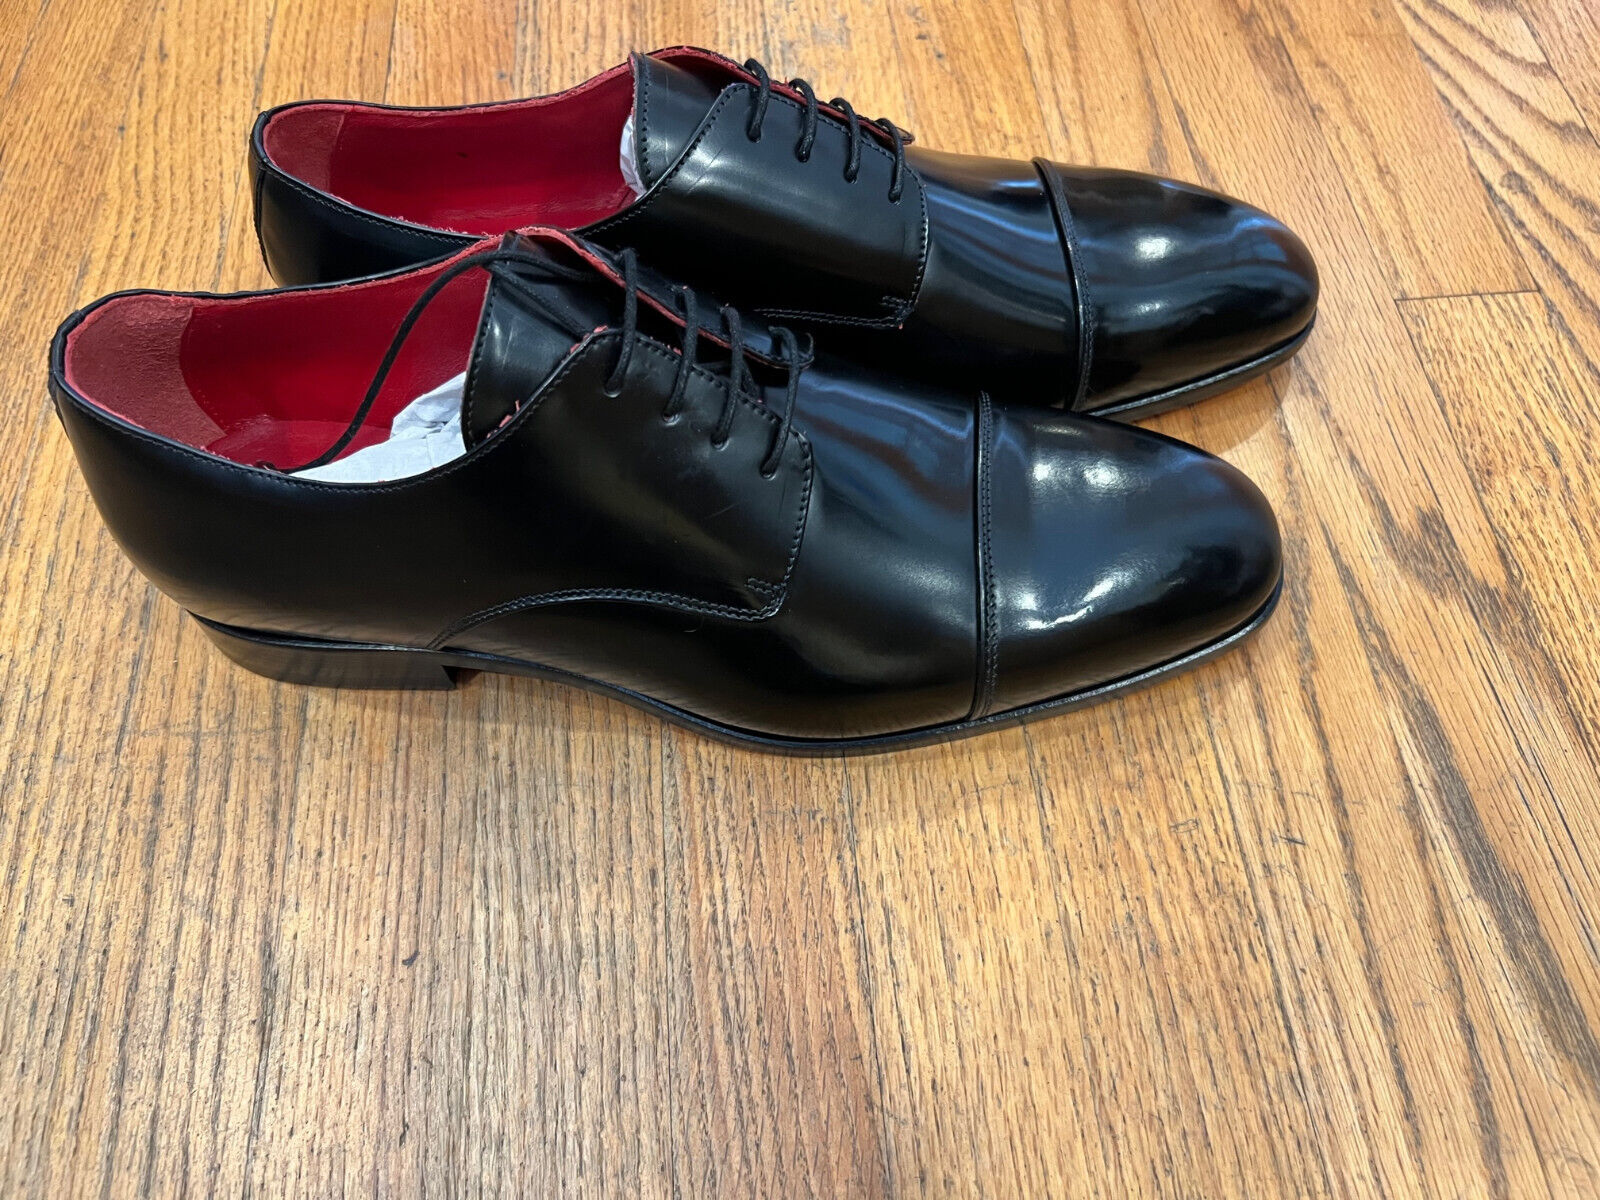 Pre-owned Handmade Black Polish Oxford Calf Skin Lace Up With Red Patent Mirror Sole. Made In Italy